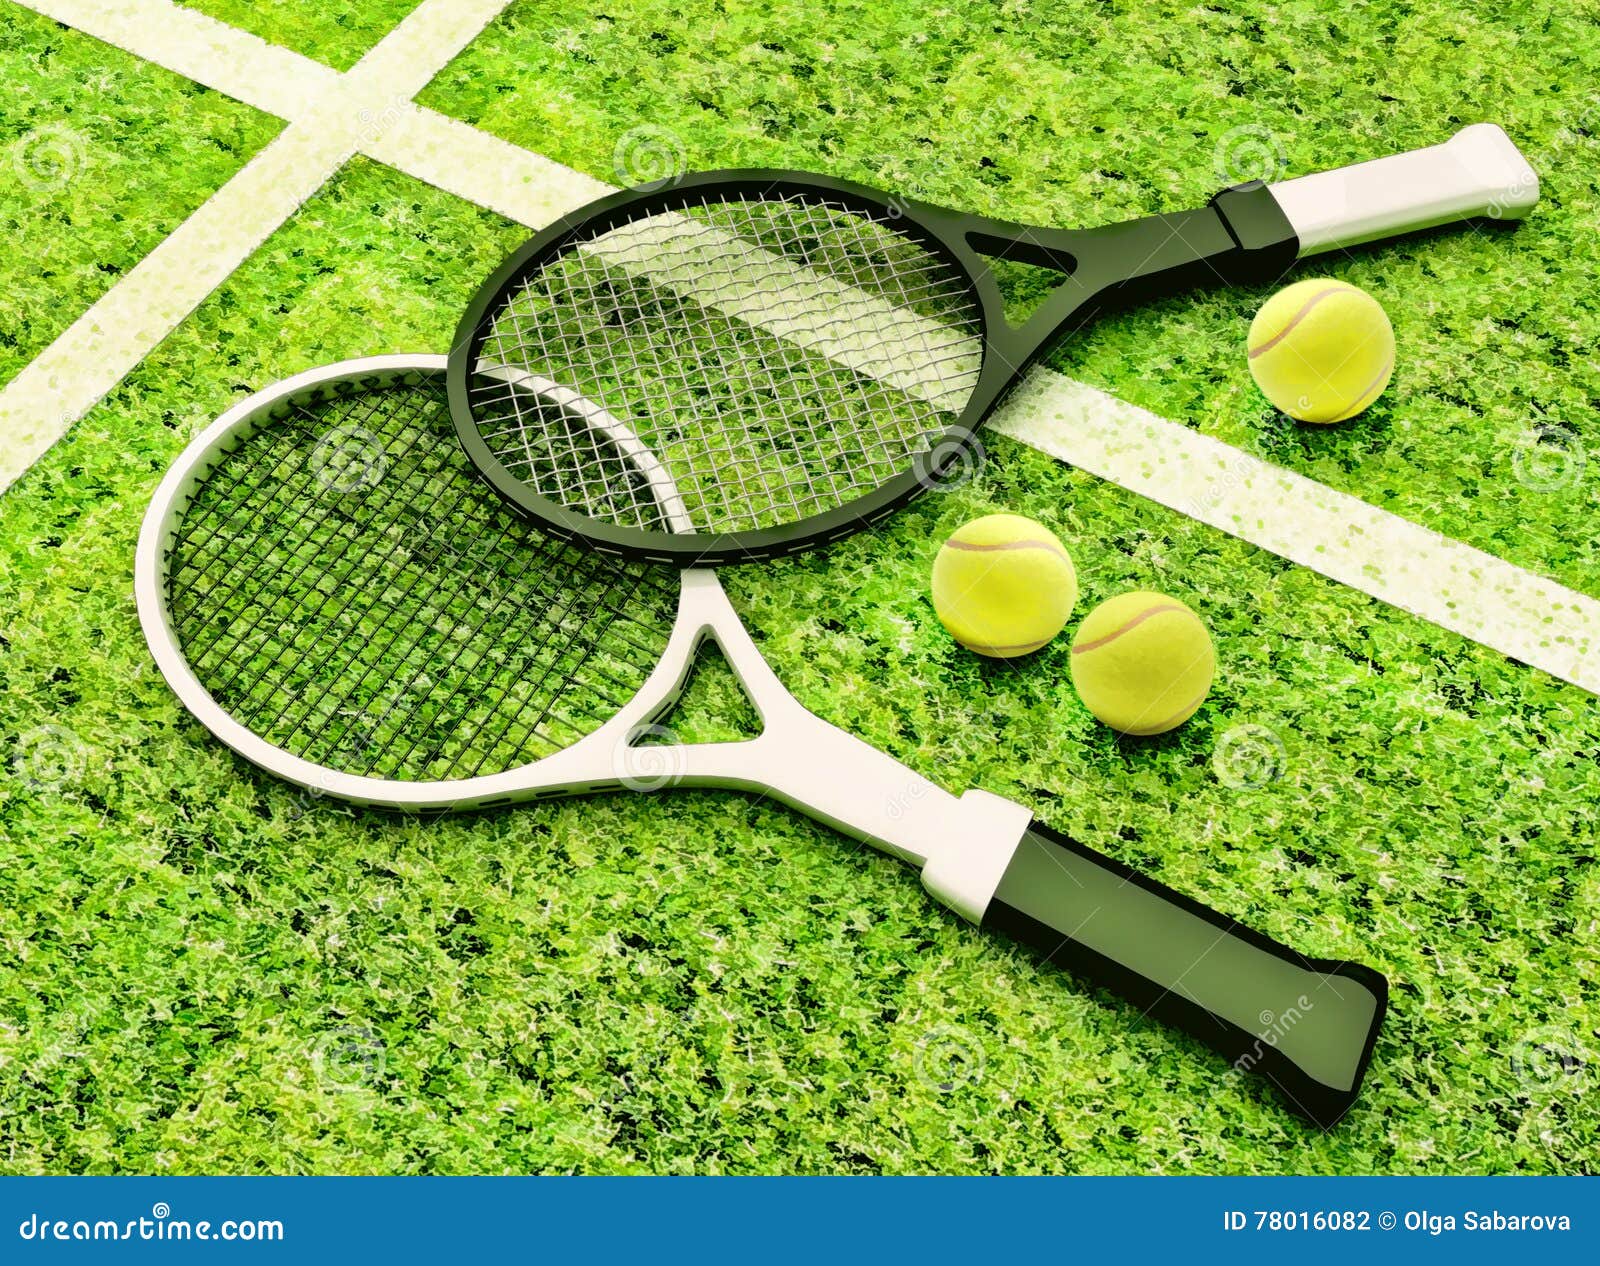 Tennis Rackets And Balls Are Located Against The Background Of Grass